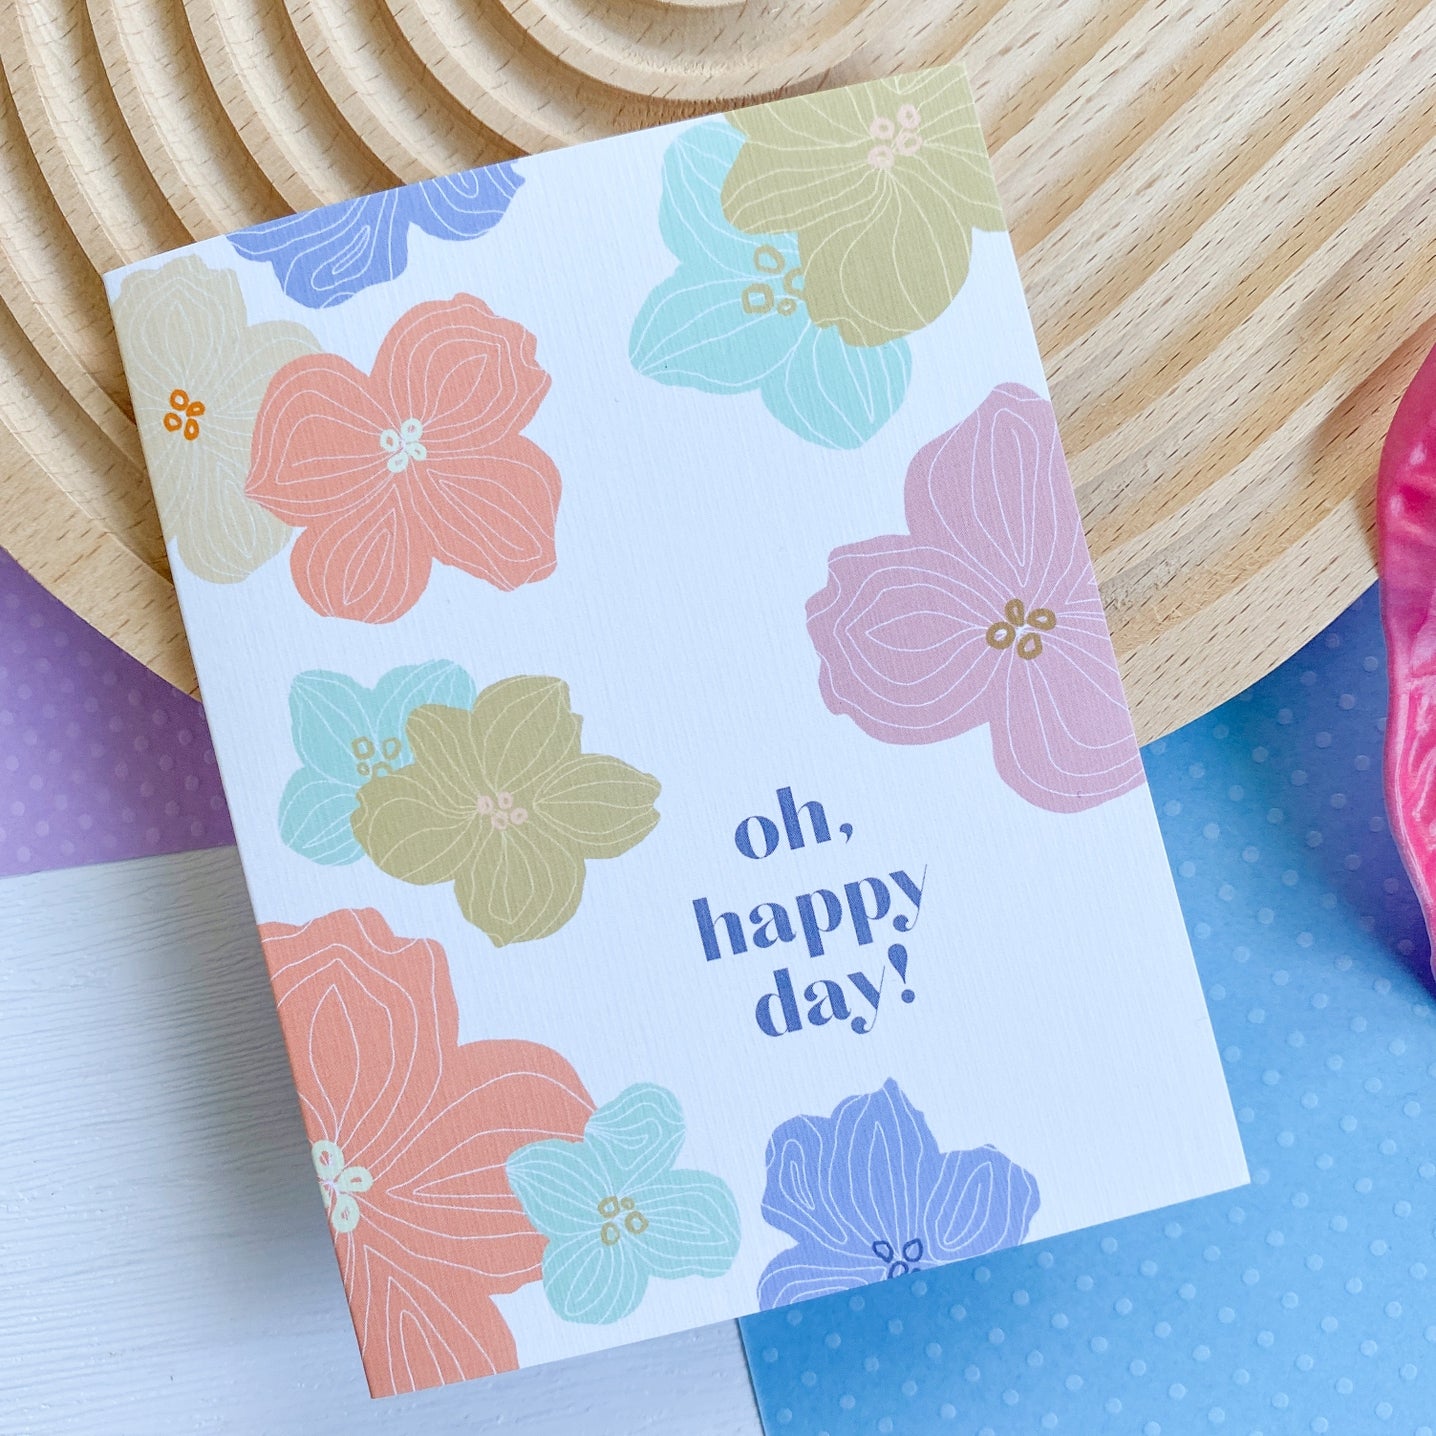 Oh, Happy Day! Greeting Card